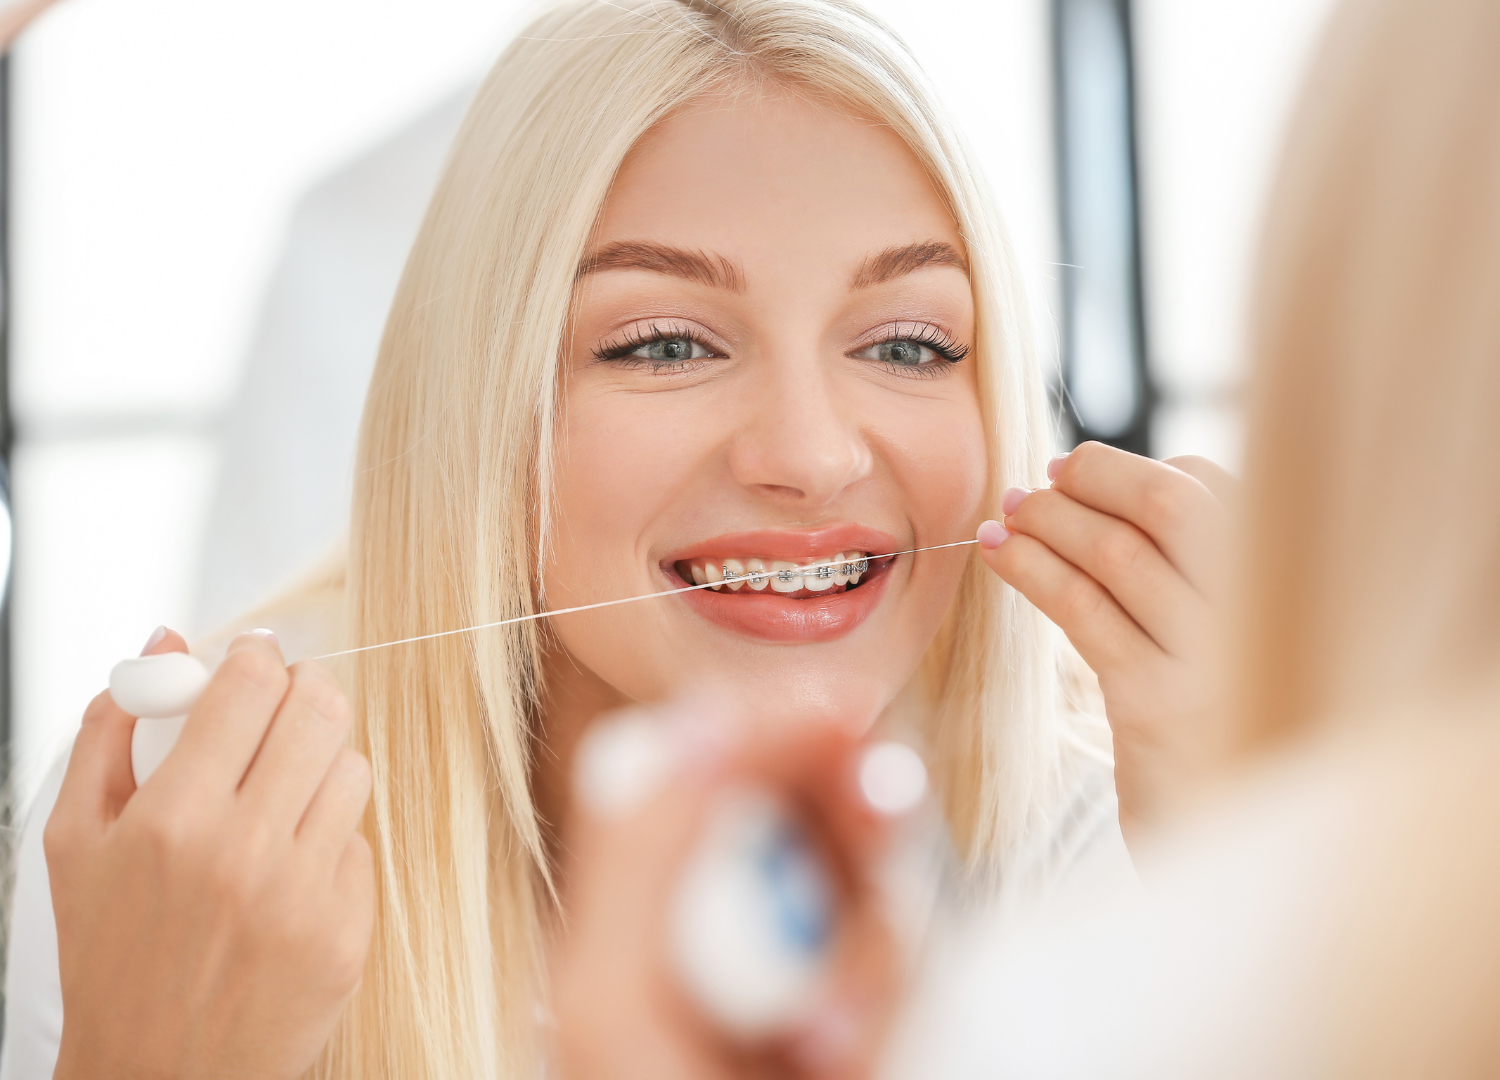 The Floss or Brush Debate: Which Comes First?